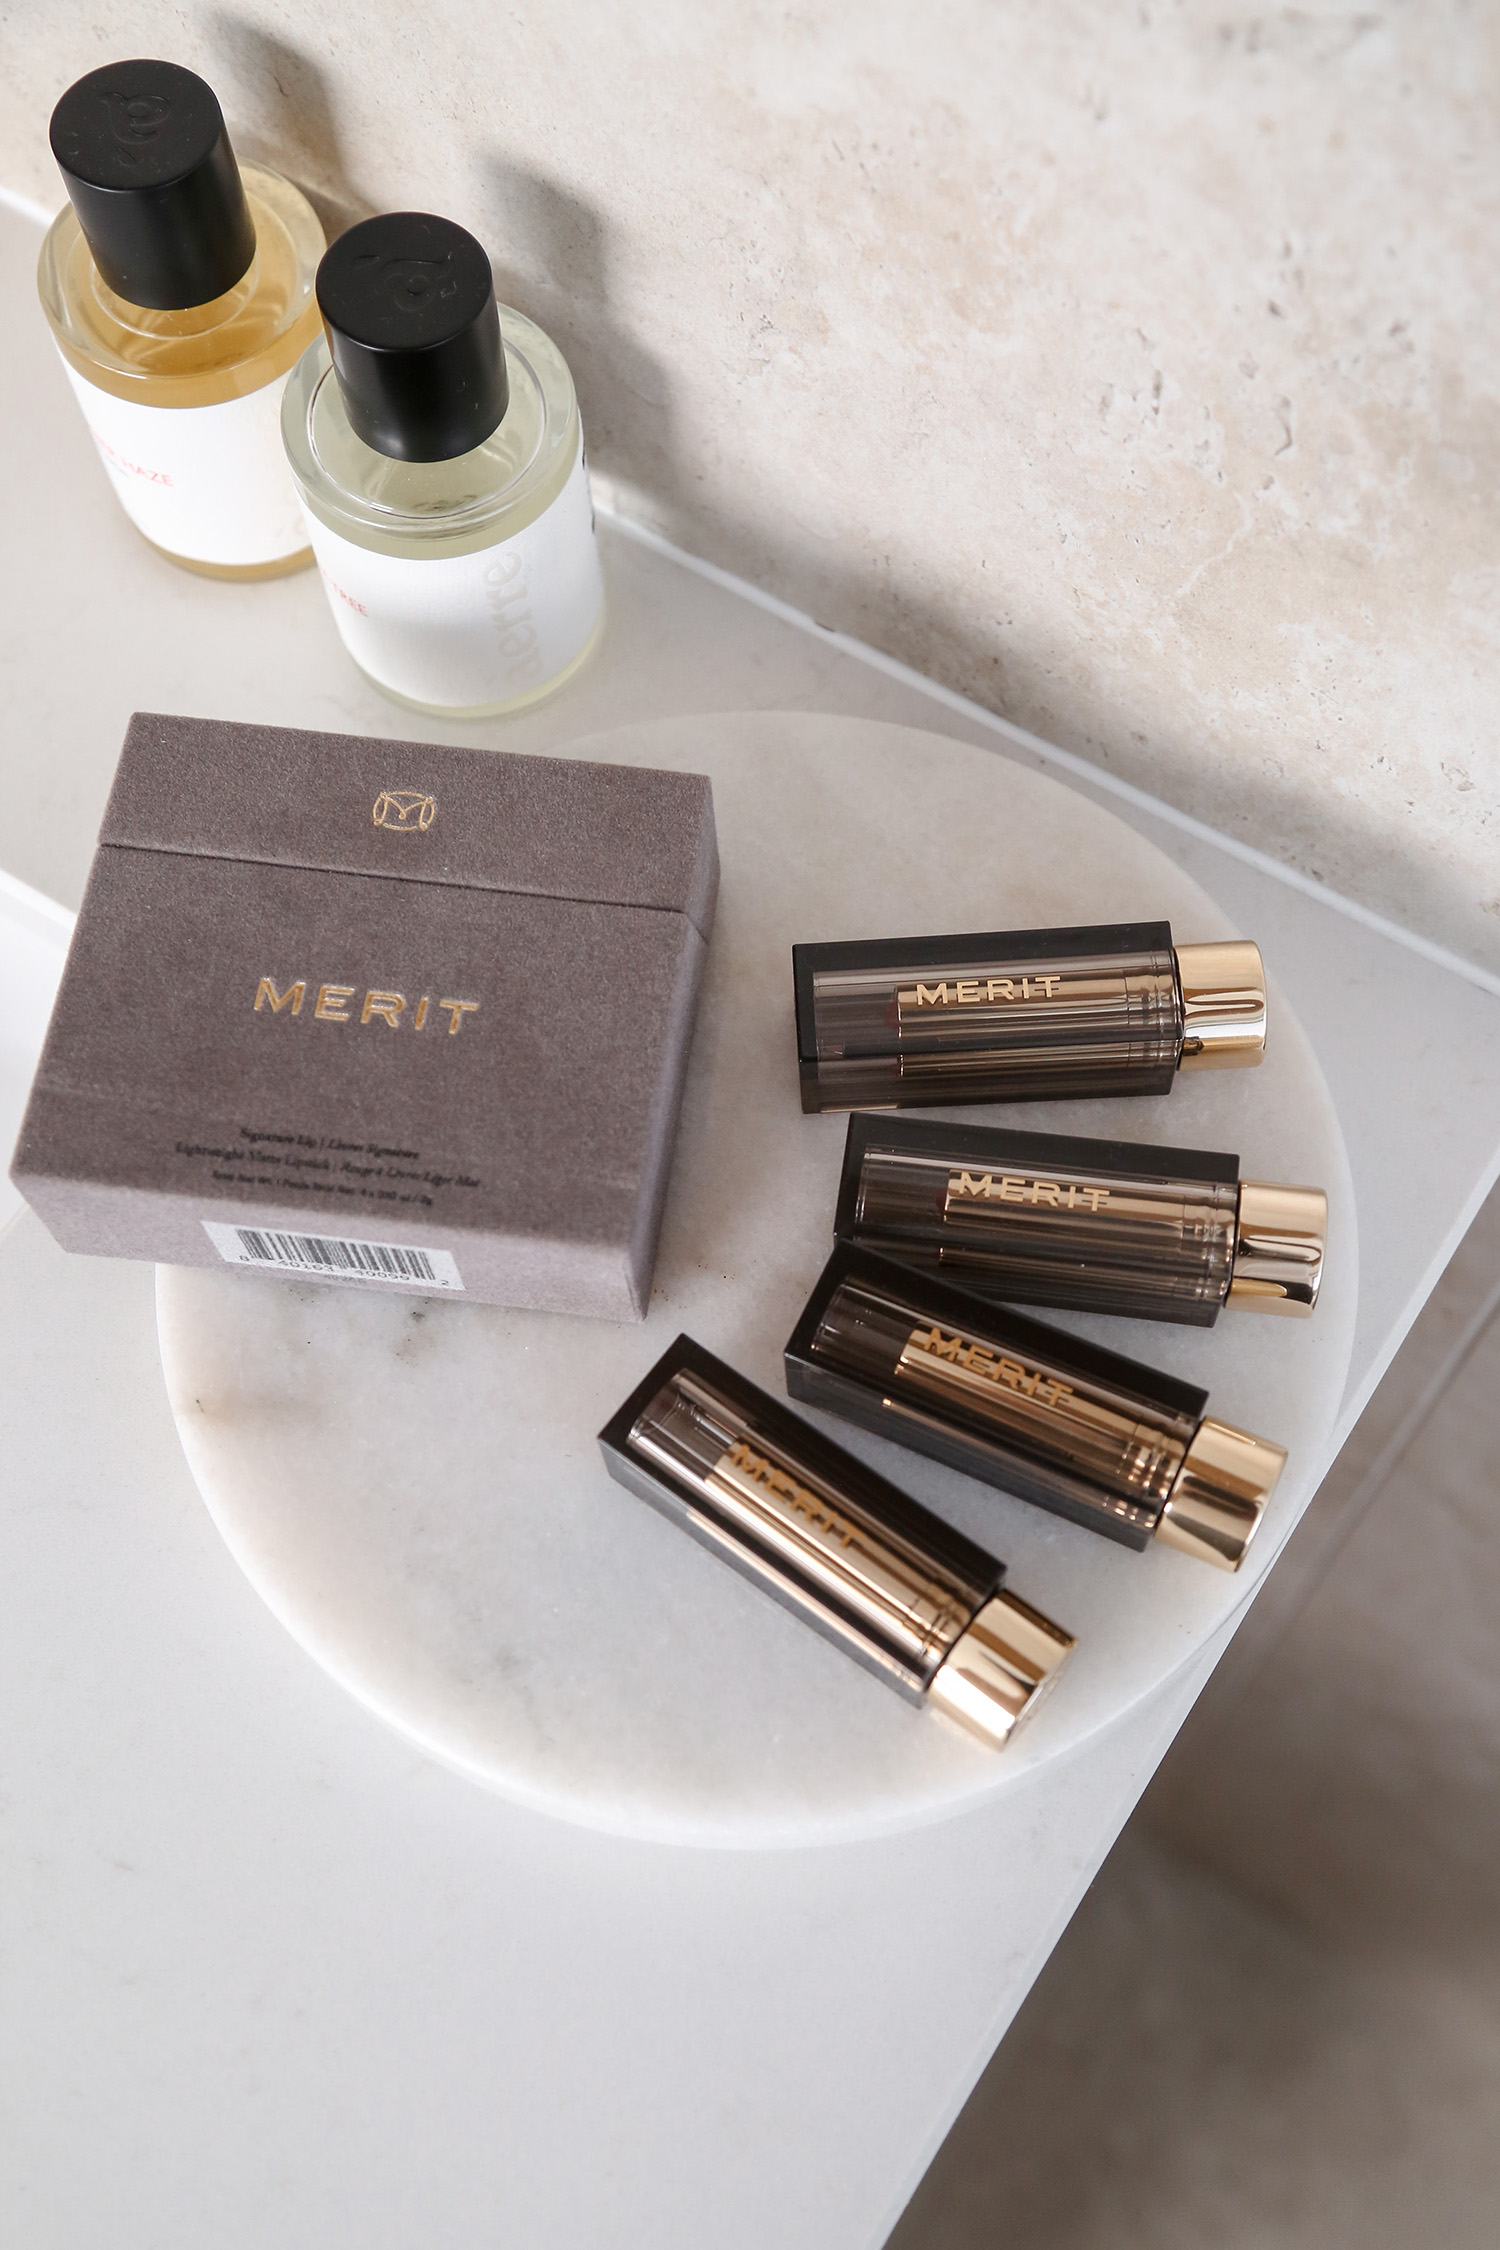 Is this the BEST Matte Lipstick? Swatches & Review of the MERIT Beauty Signature Lip Mattes